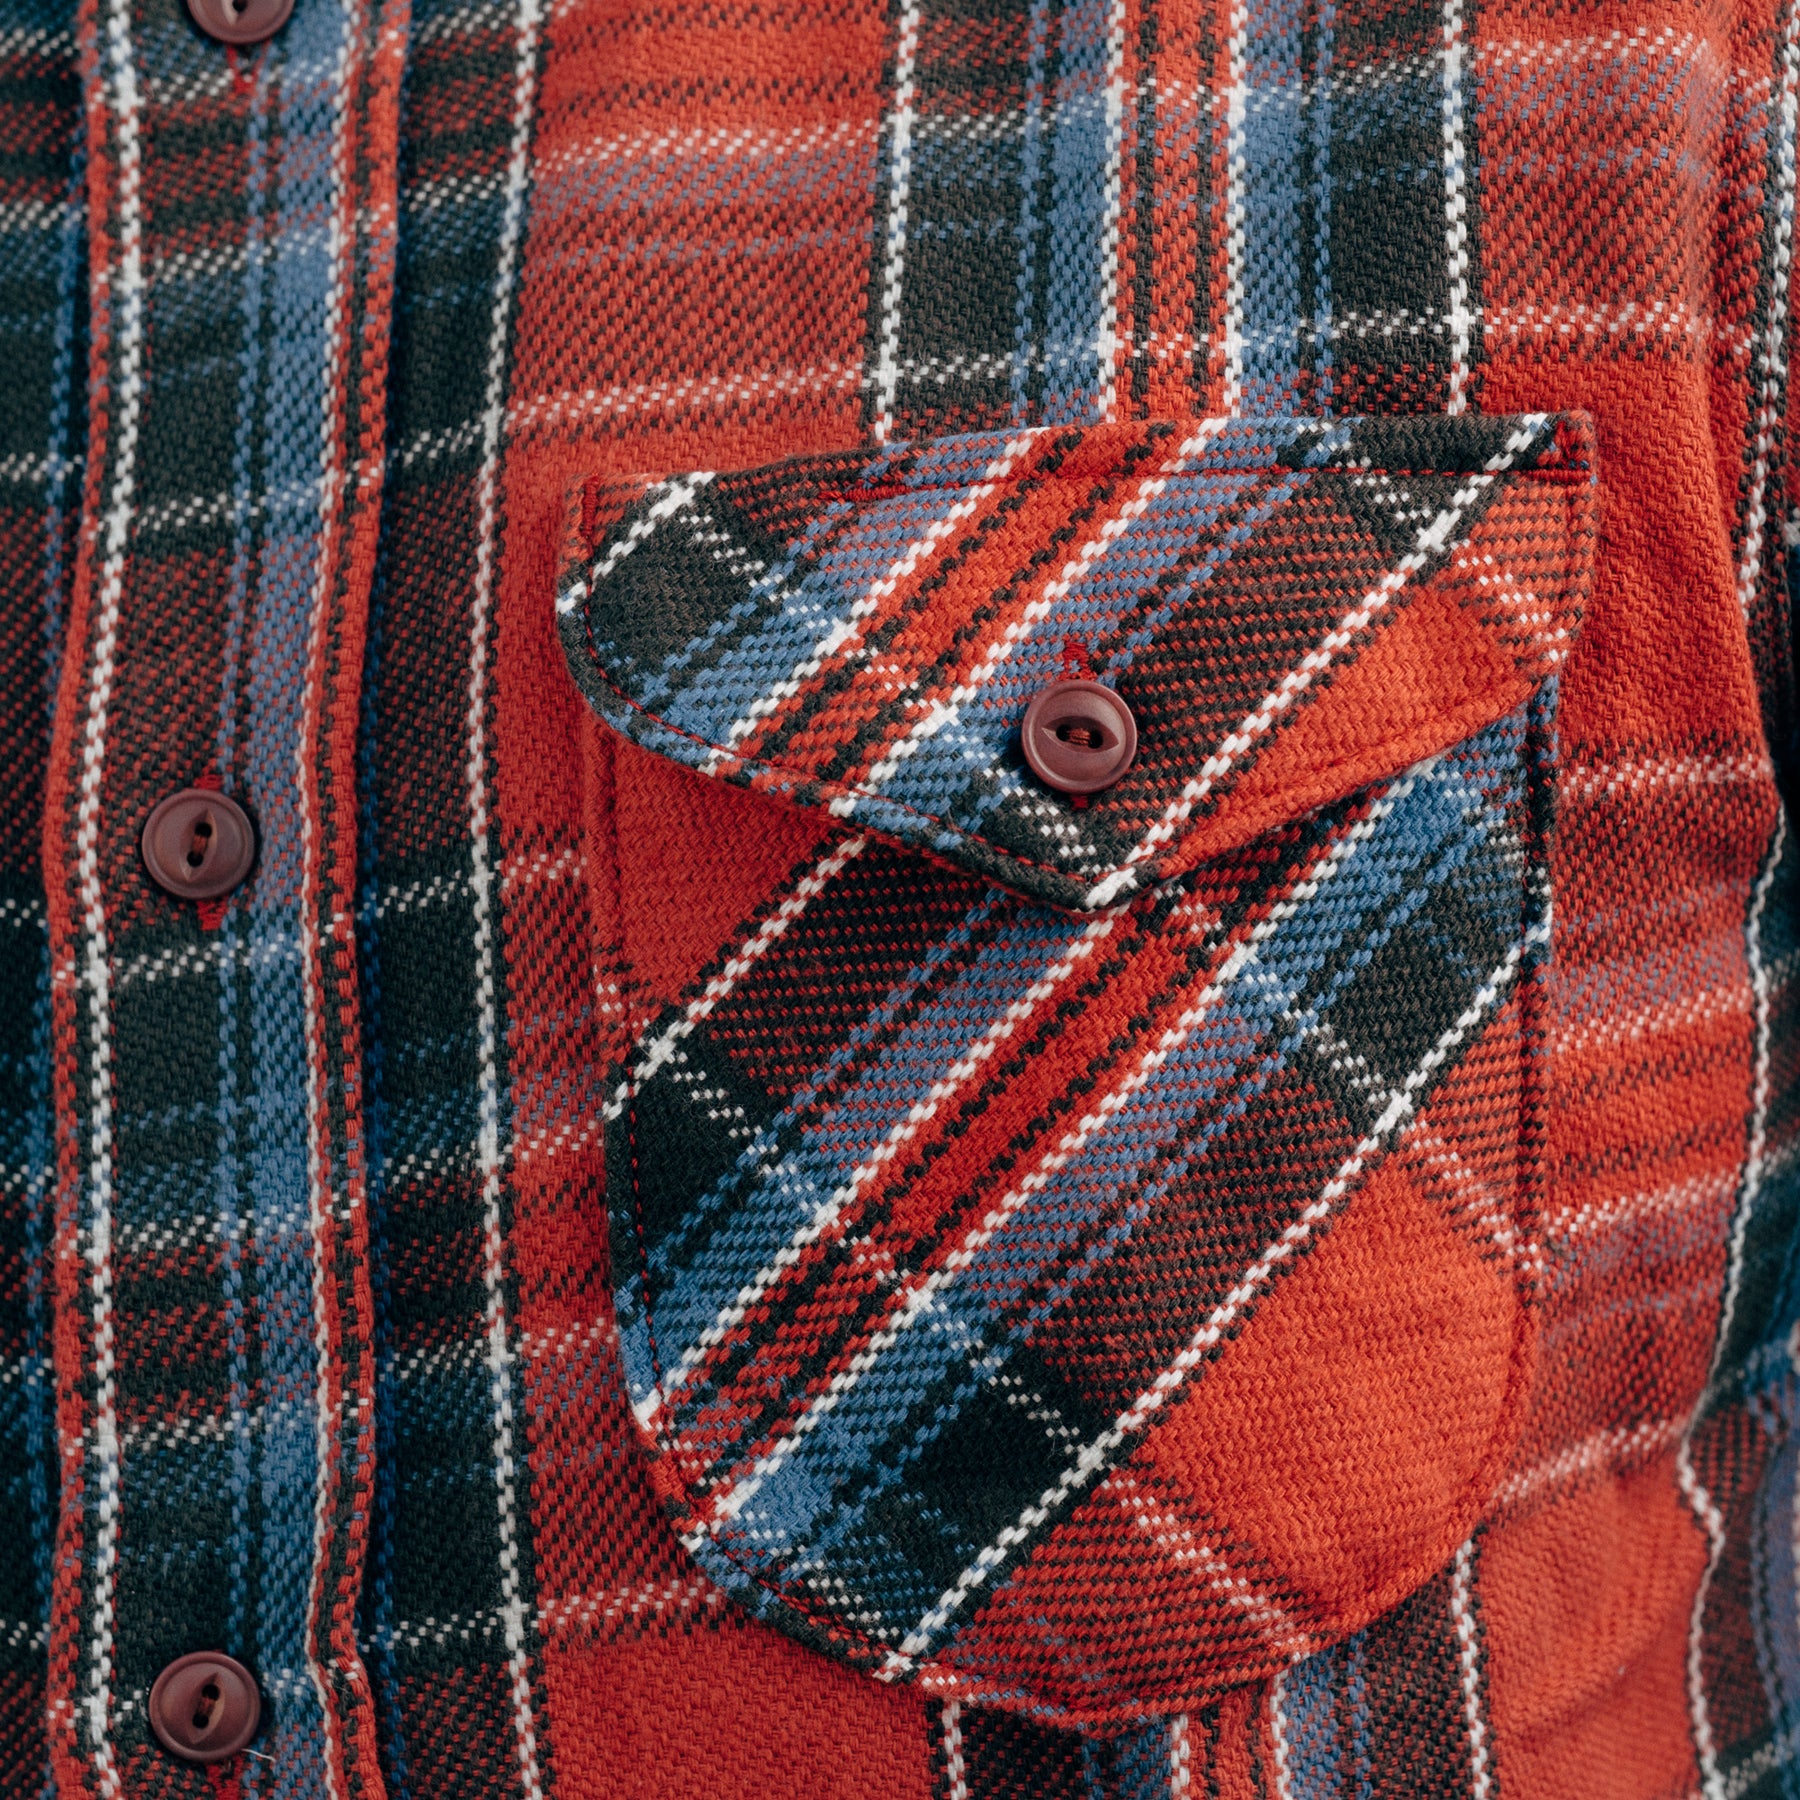 Ues Heavy Flannel Shirt - Red and Blue 3/L